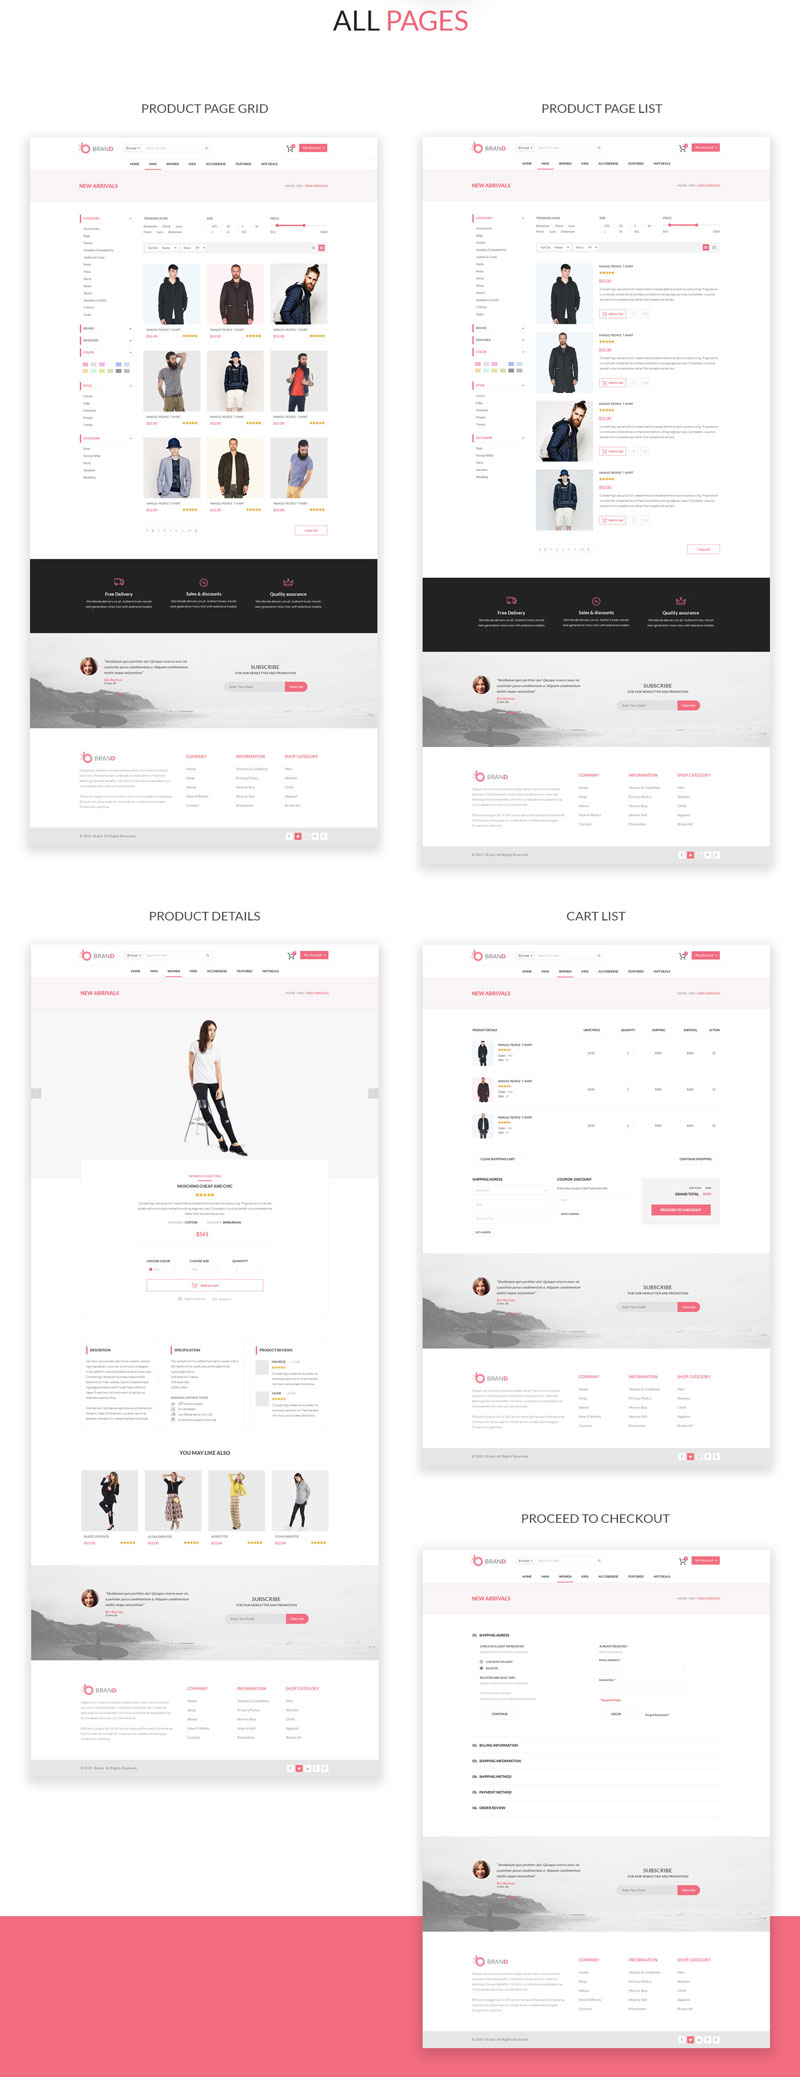 ecommerce psd templates free download